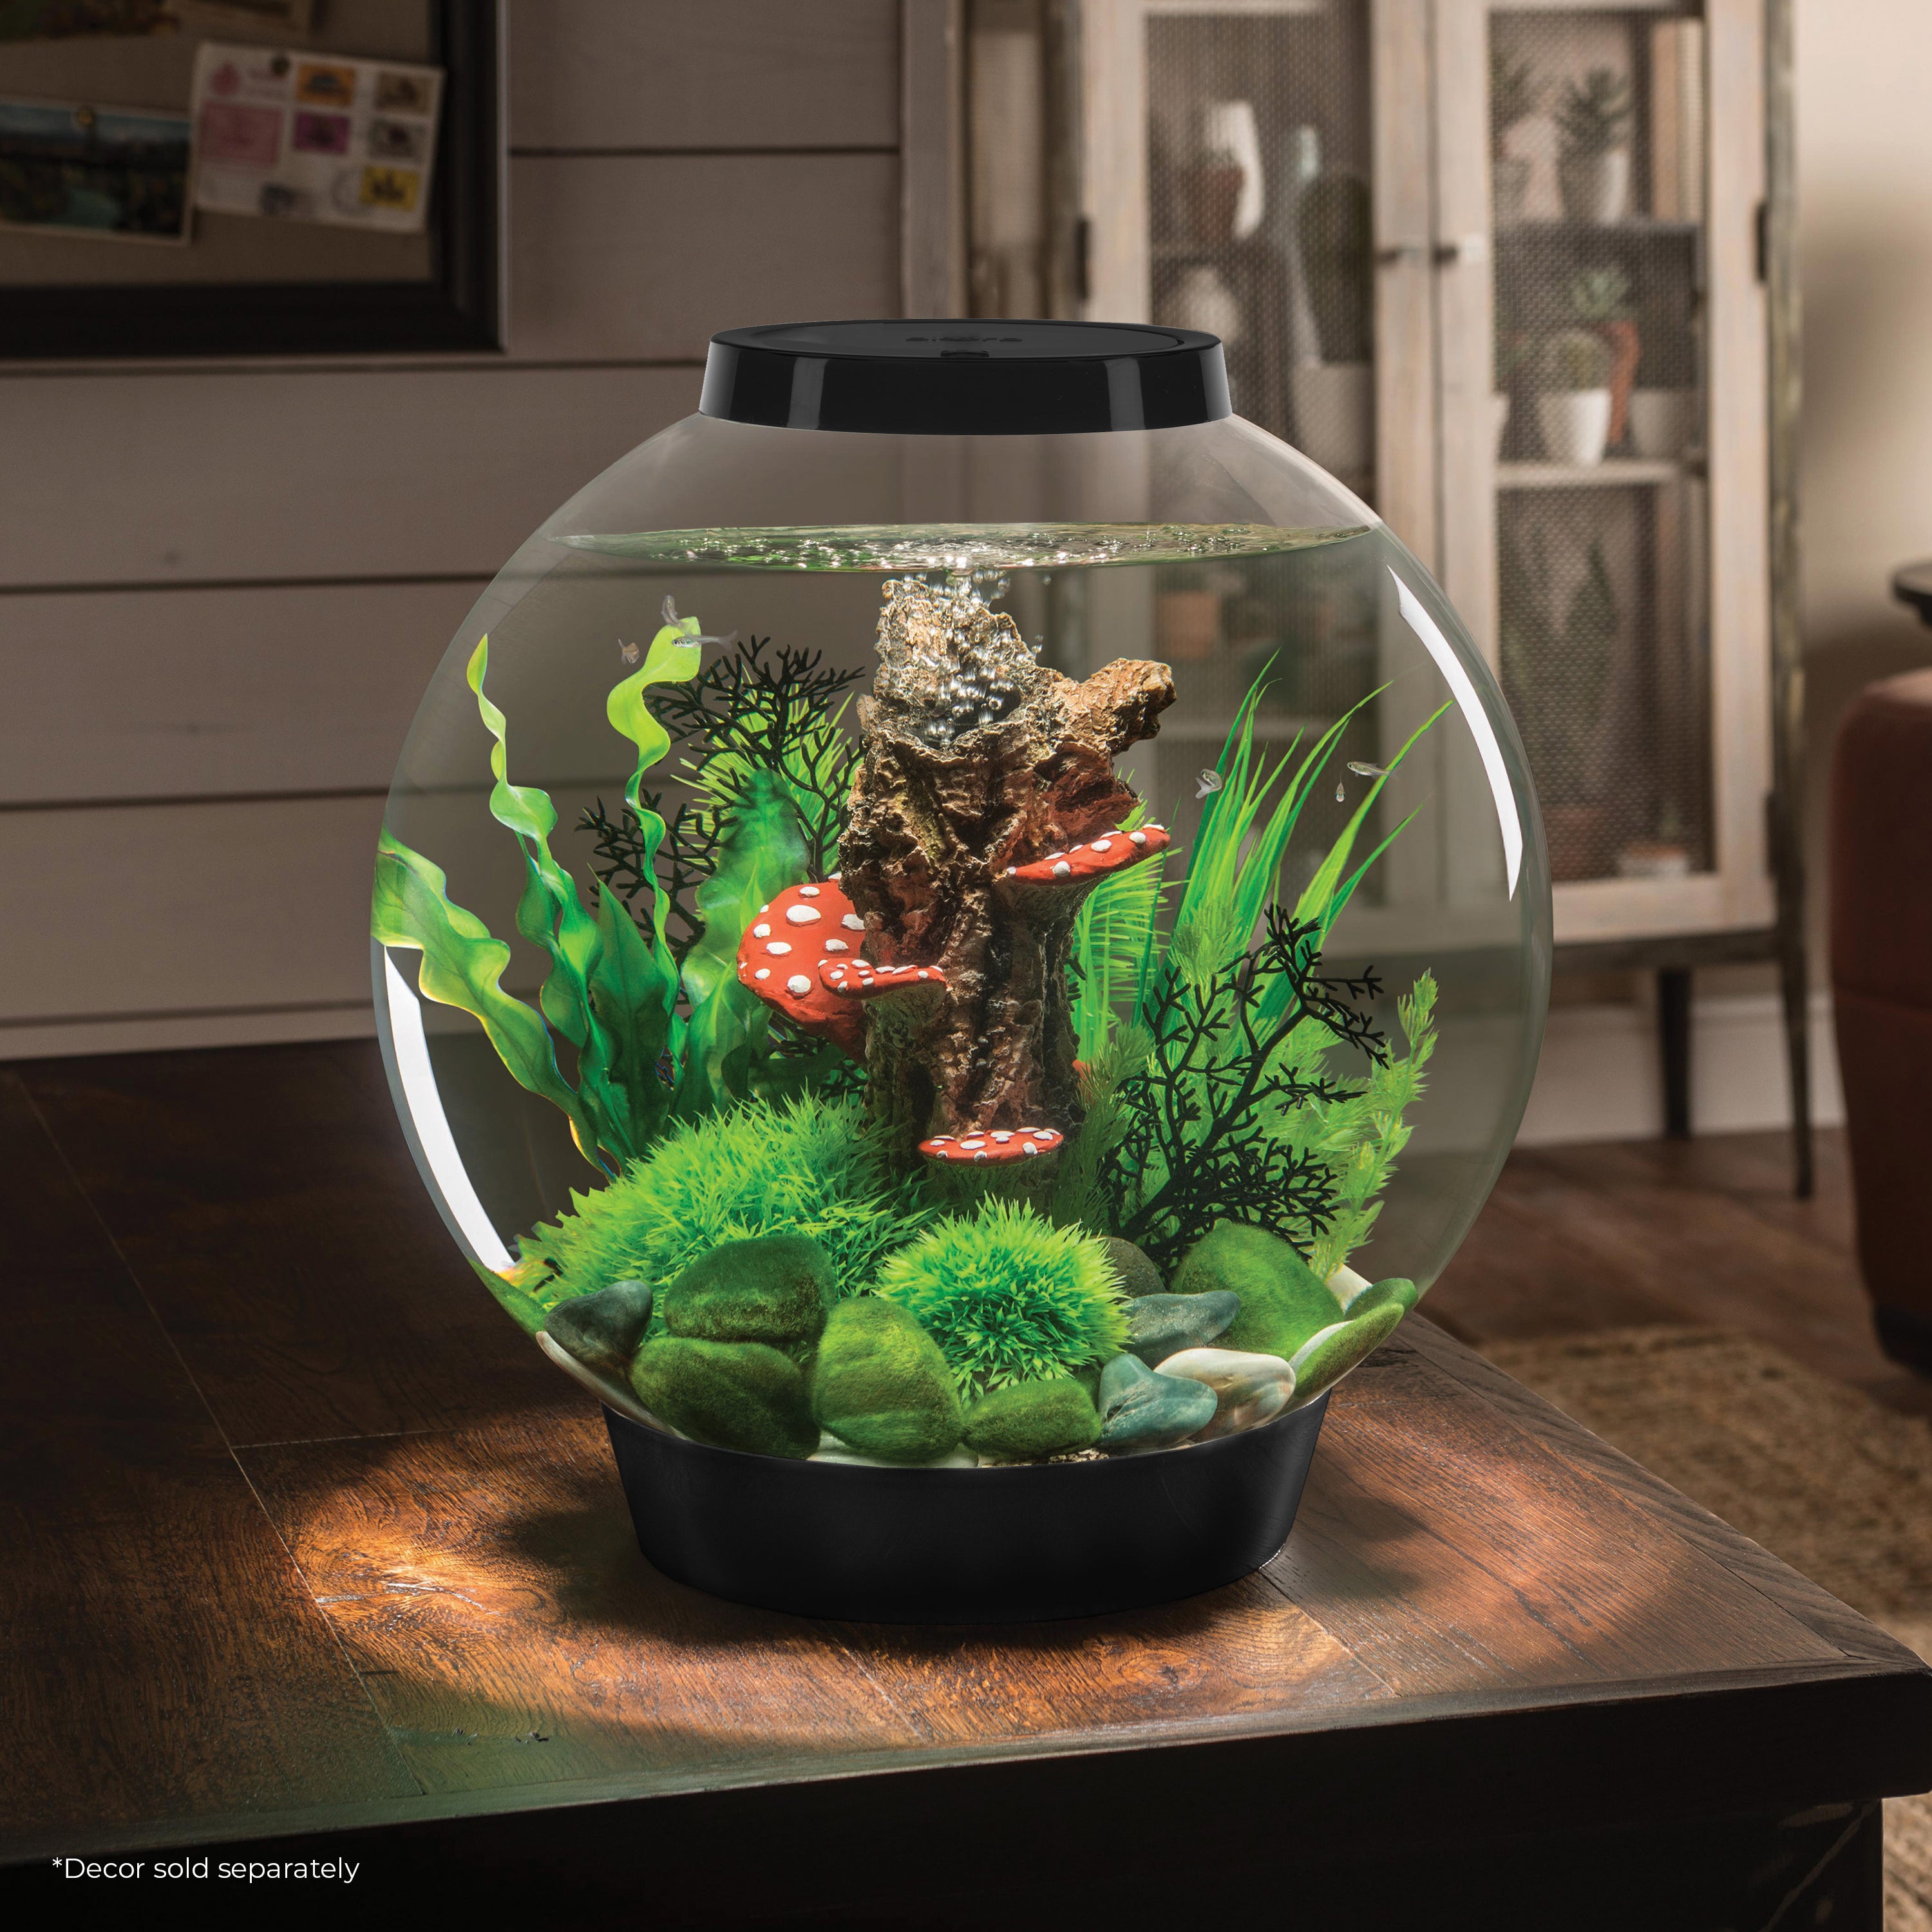 Get inspiration for your aquarium with CLASSIC 30 Aquarium with Standard Light - 8 gallon available in black